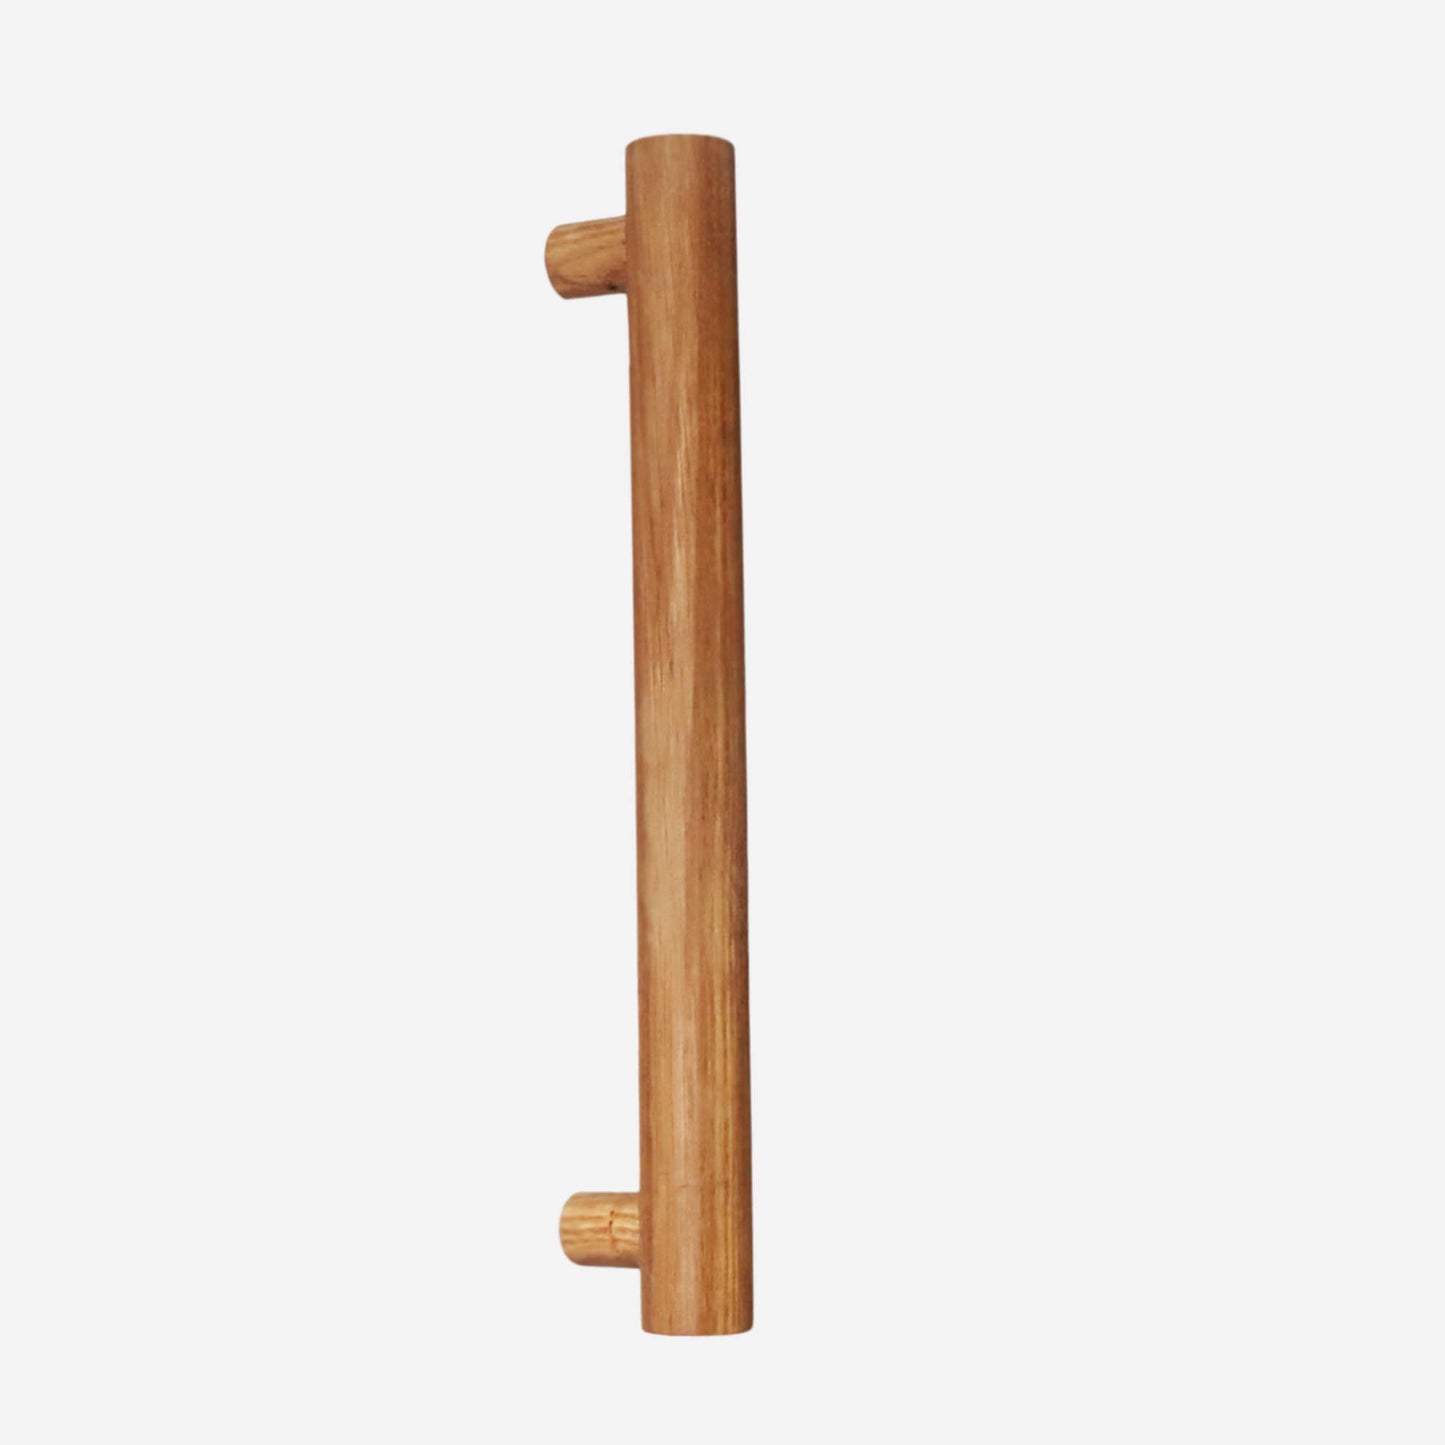 A cylindrical wooden handle with two smaller cylindrical stubs for mounting, displayed against a white background.